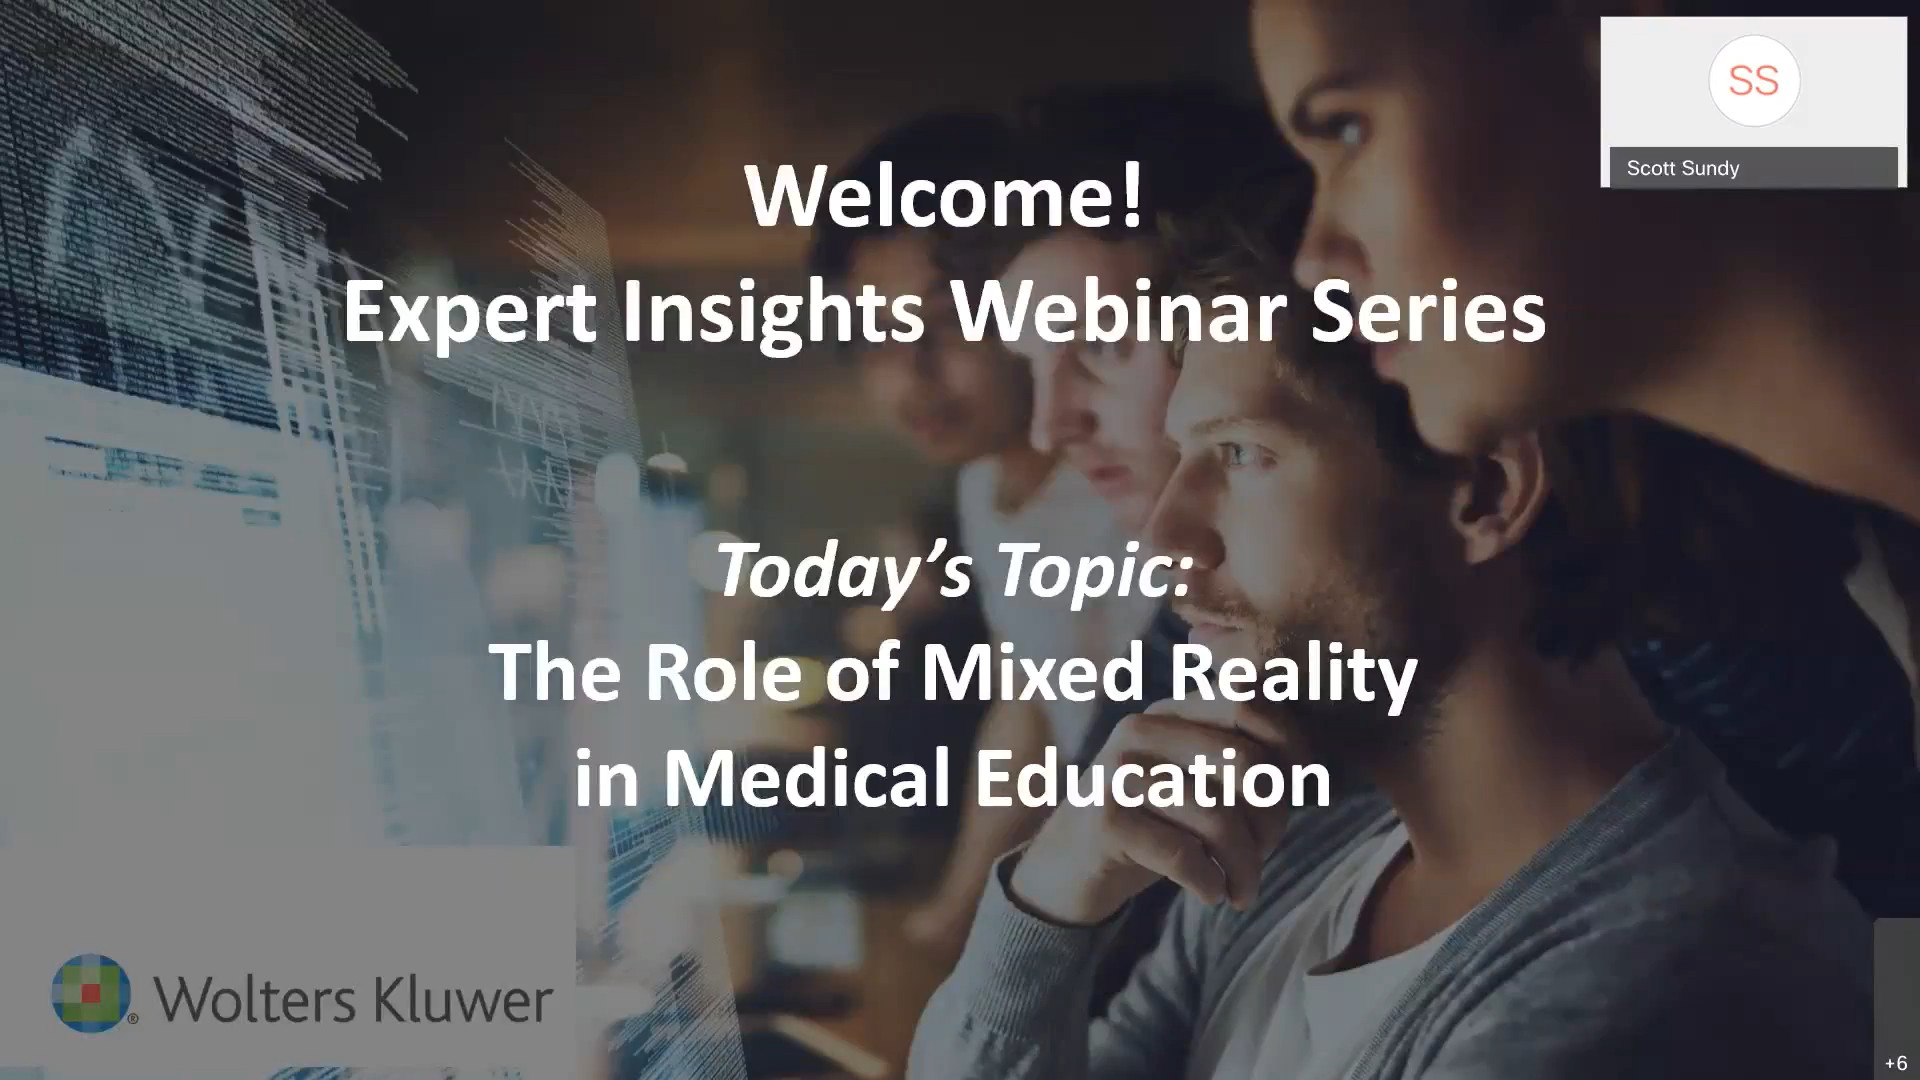 Screenshot of The Role of Mixed Reality in Medical Education video